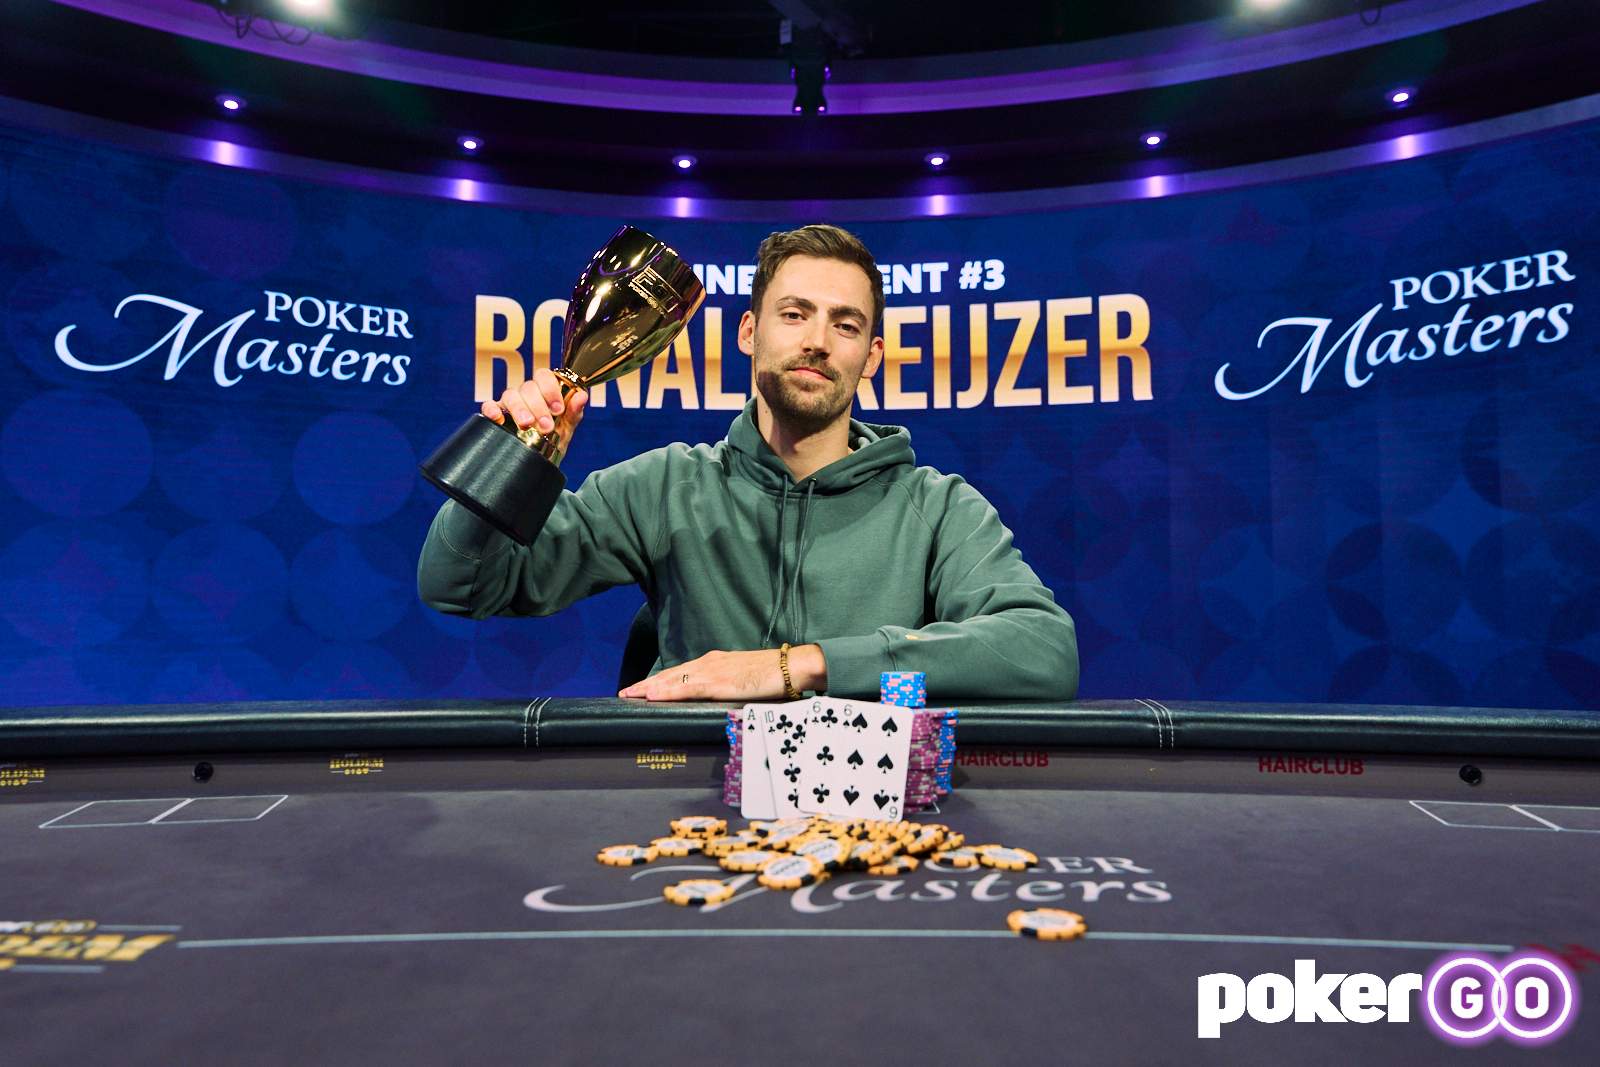 Ronald Keijzer Wins 2022 Poker Masters Event #3 for $202,500